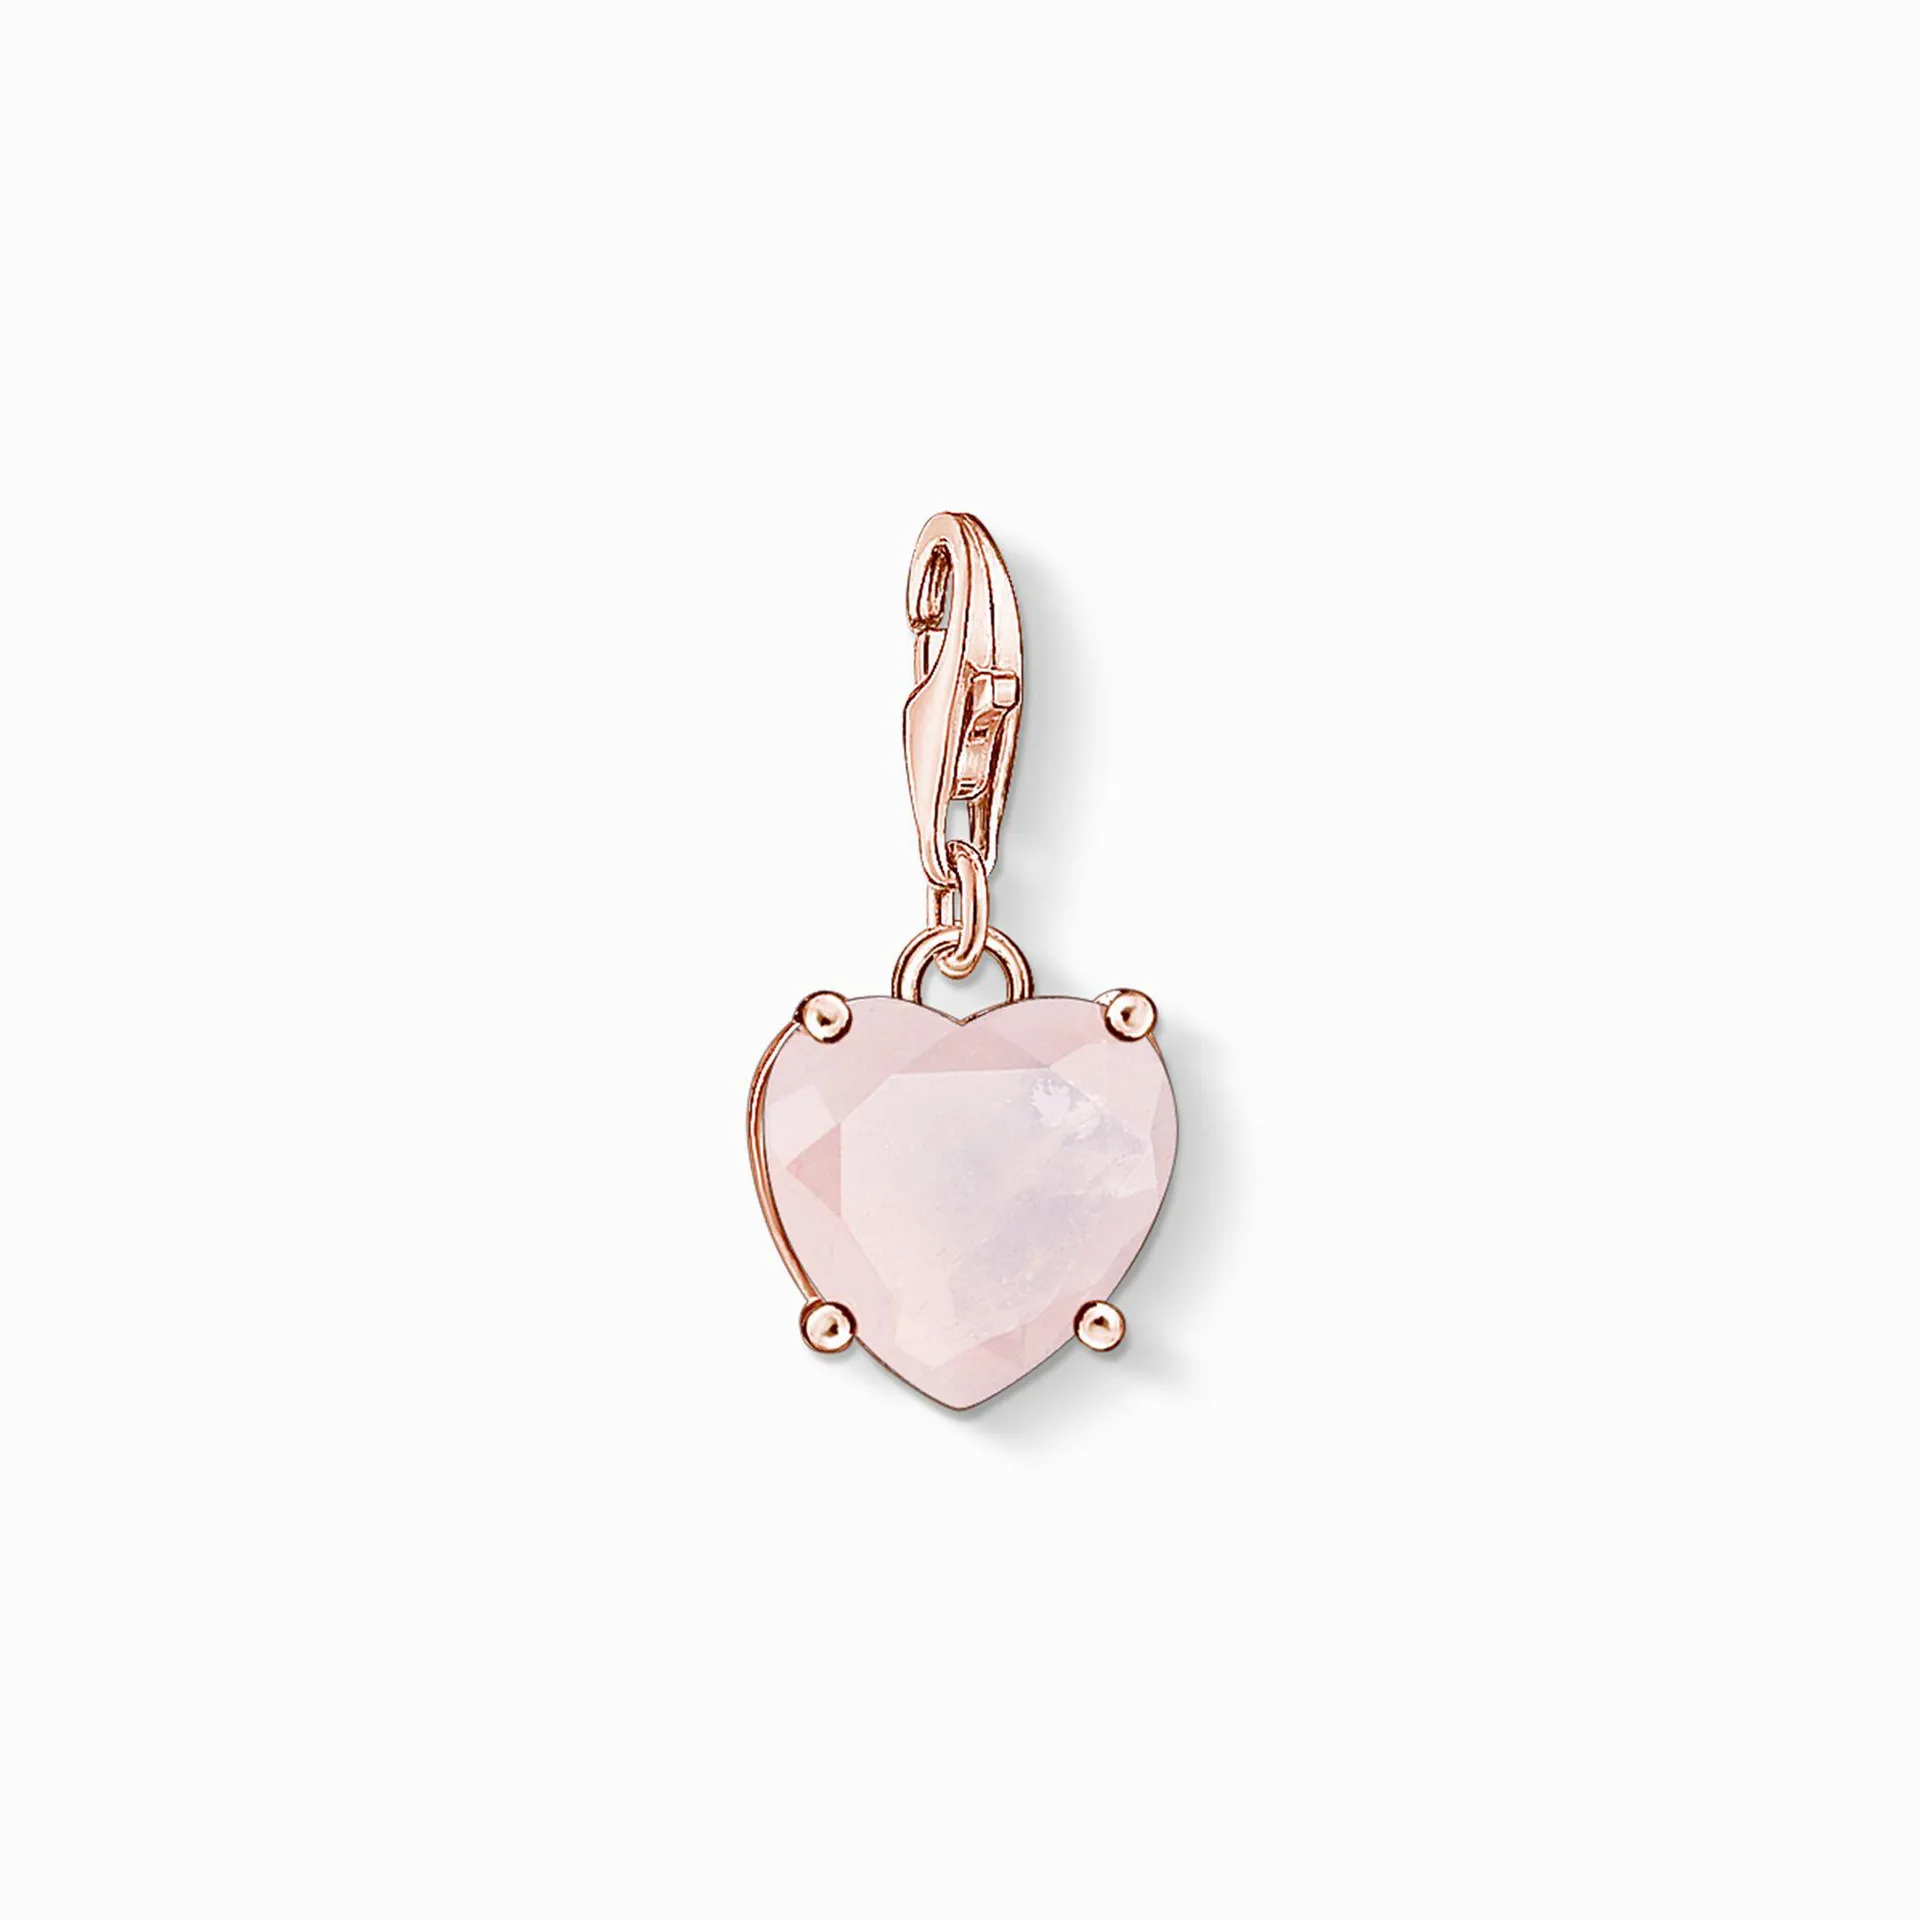 Charm pendant heart with hot pink stone